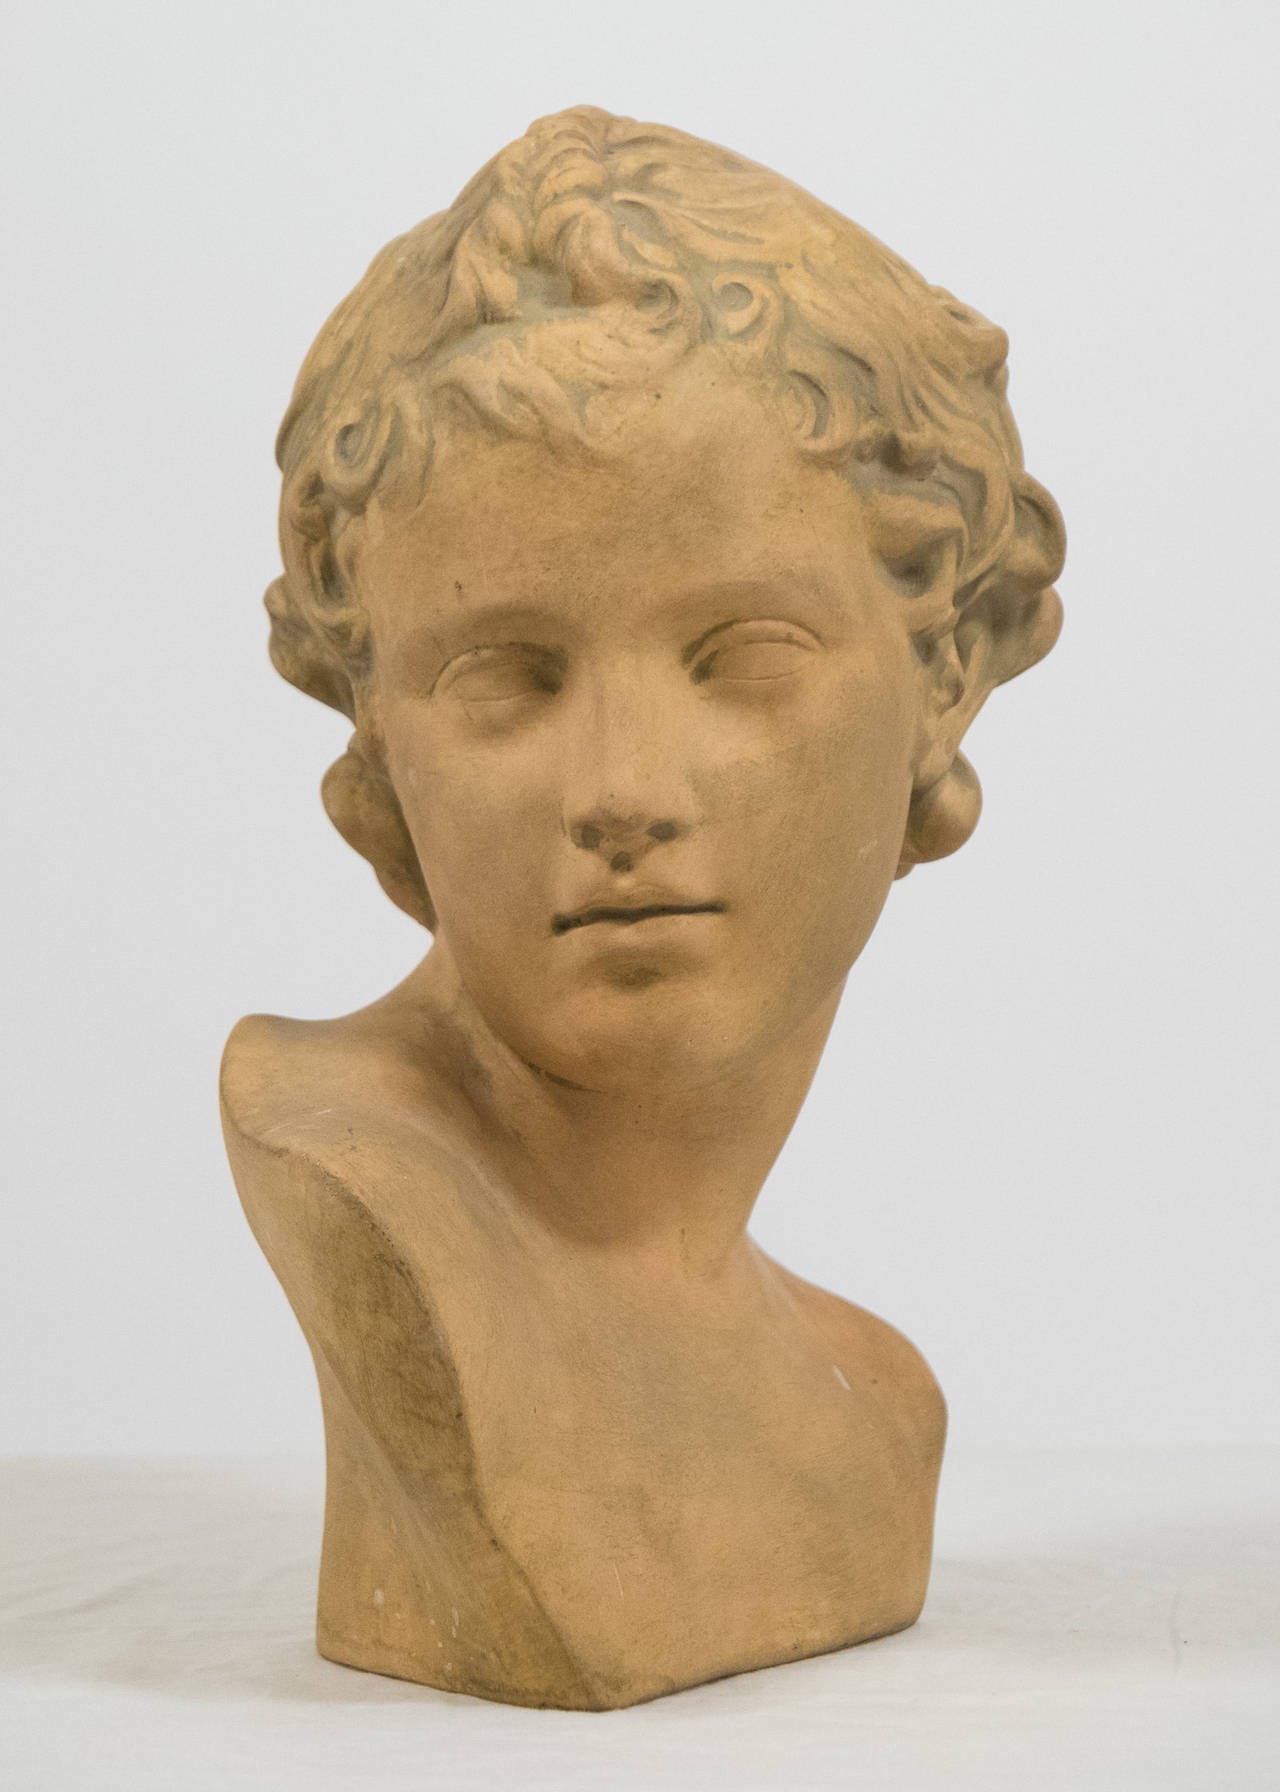 French antique bust of Adonis as a child, plaster with a terracotta patina. A beautiful piece with great decorative impact.